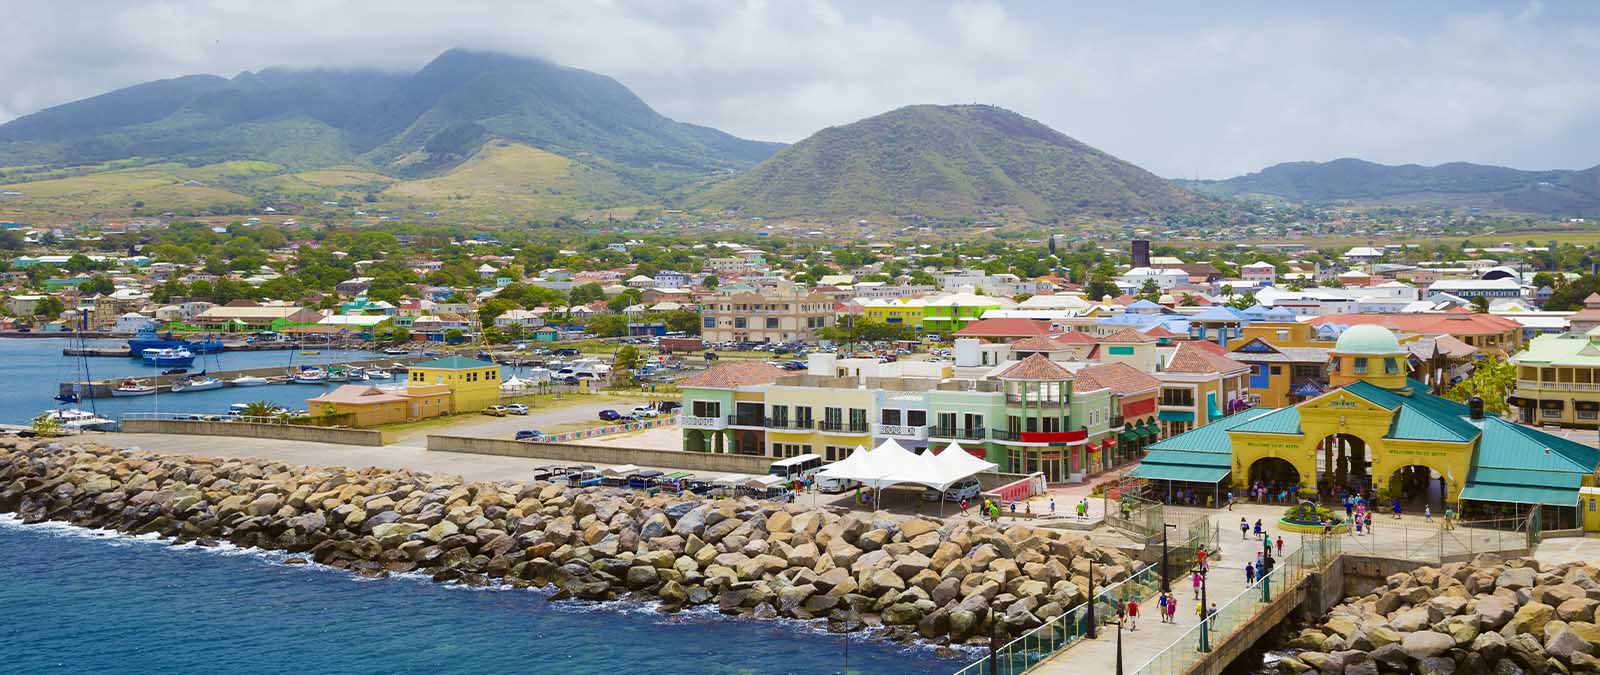 As a citizen of St Kitts and Nevis, you can settle there and enjoy the highest quality Caribbean lifestyle